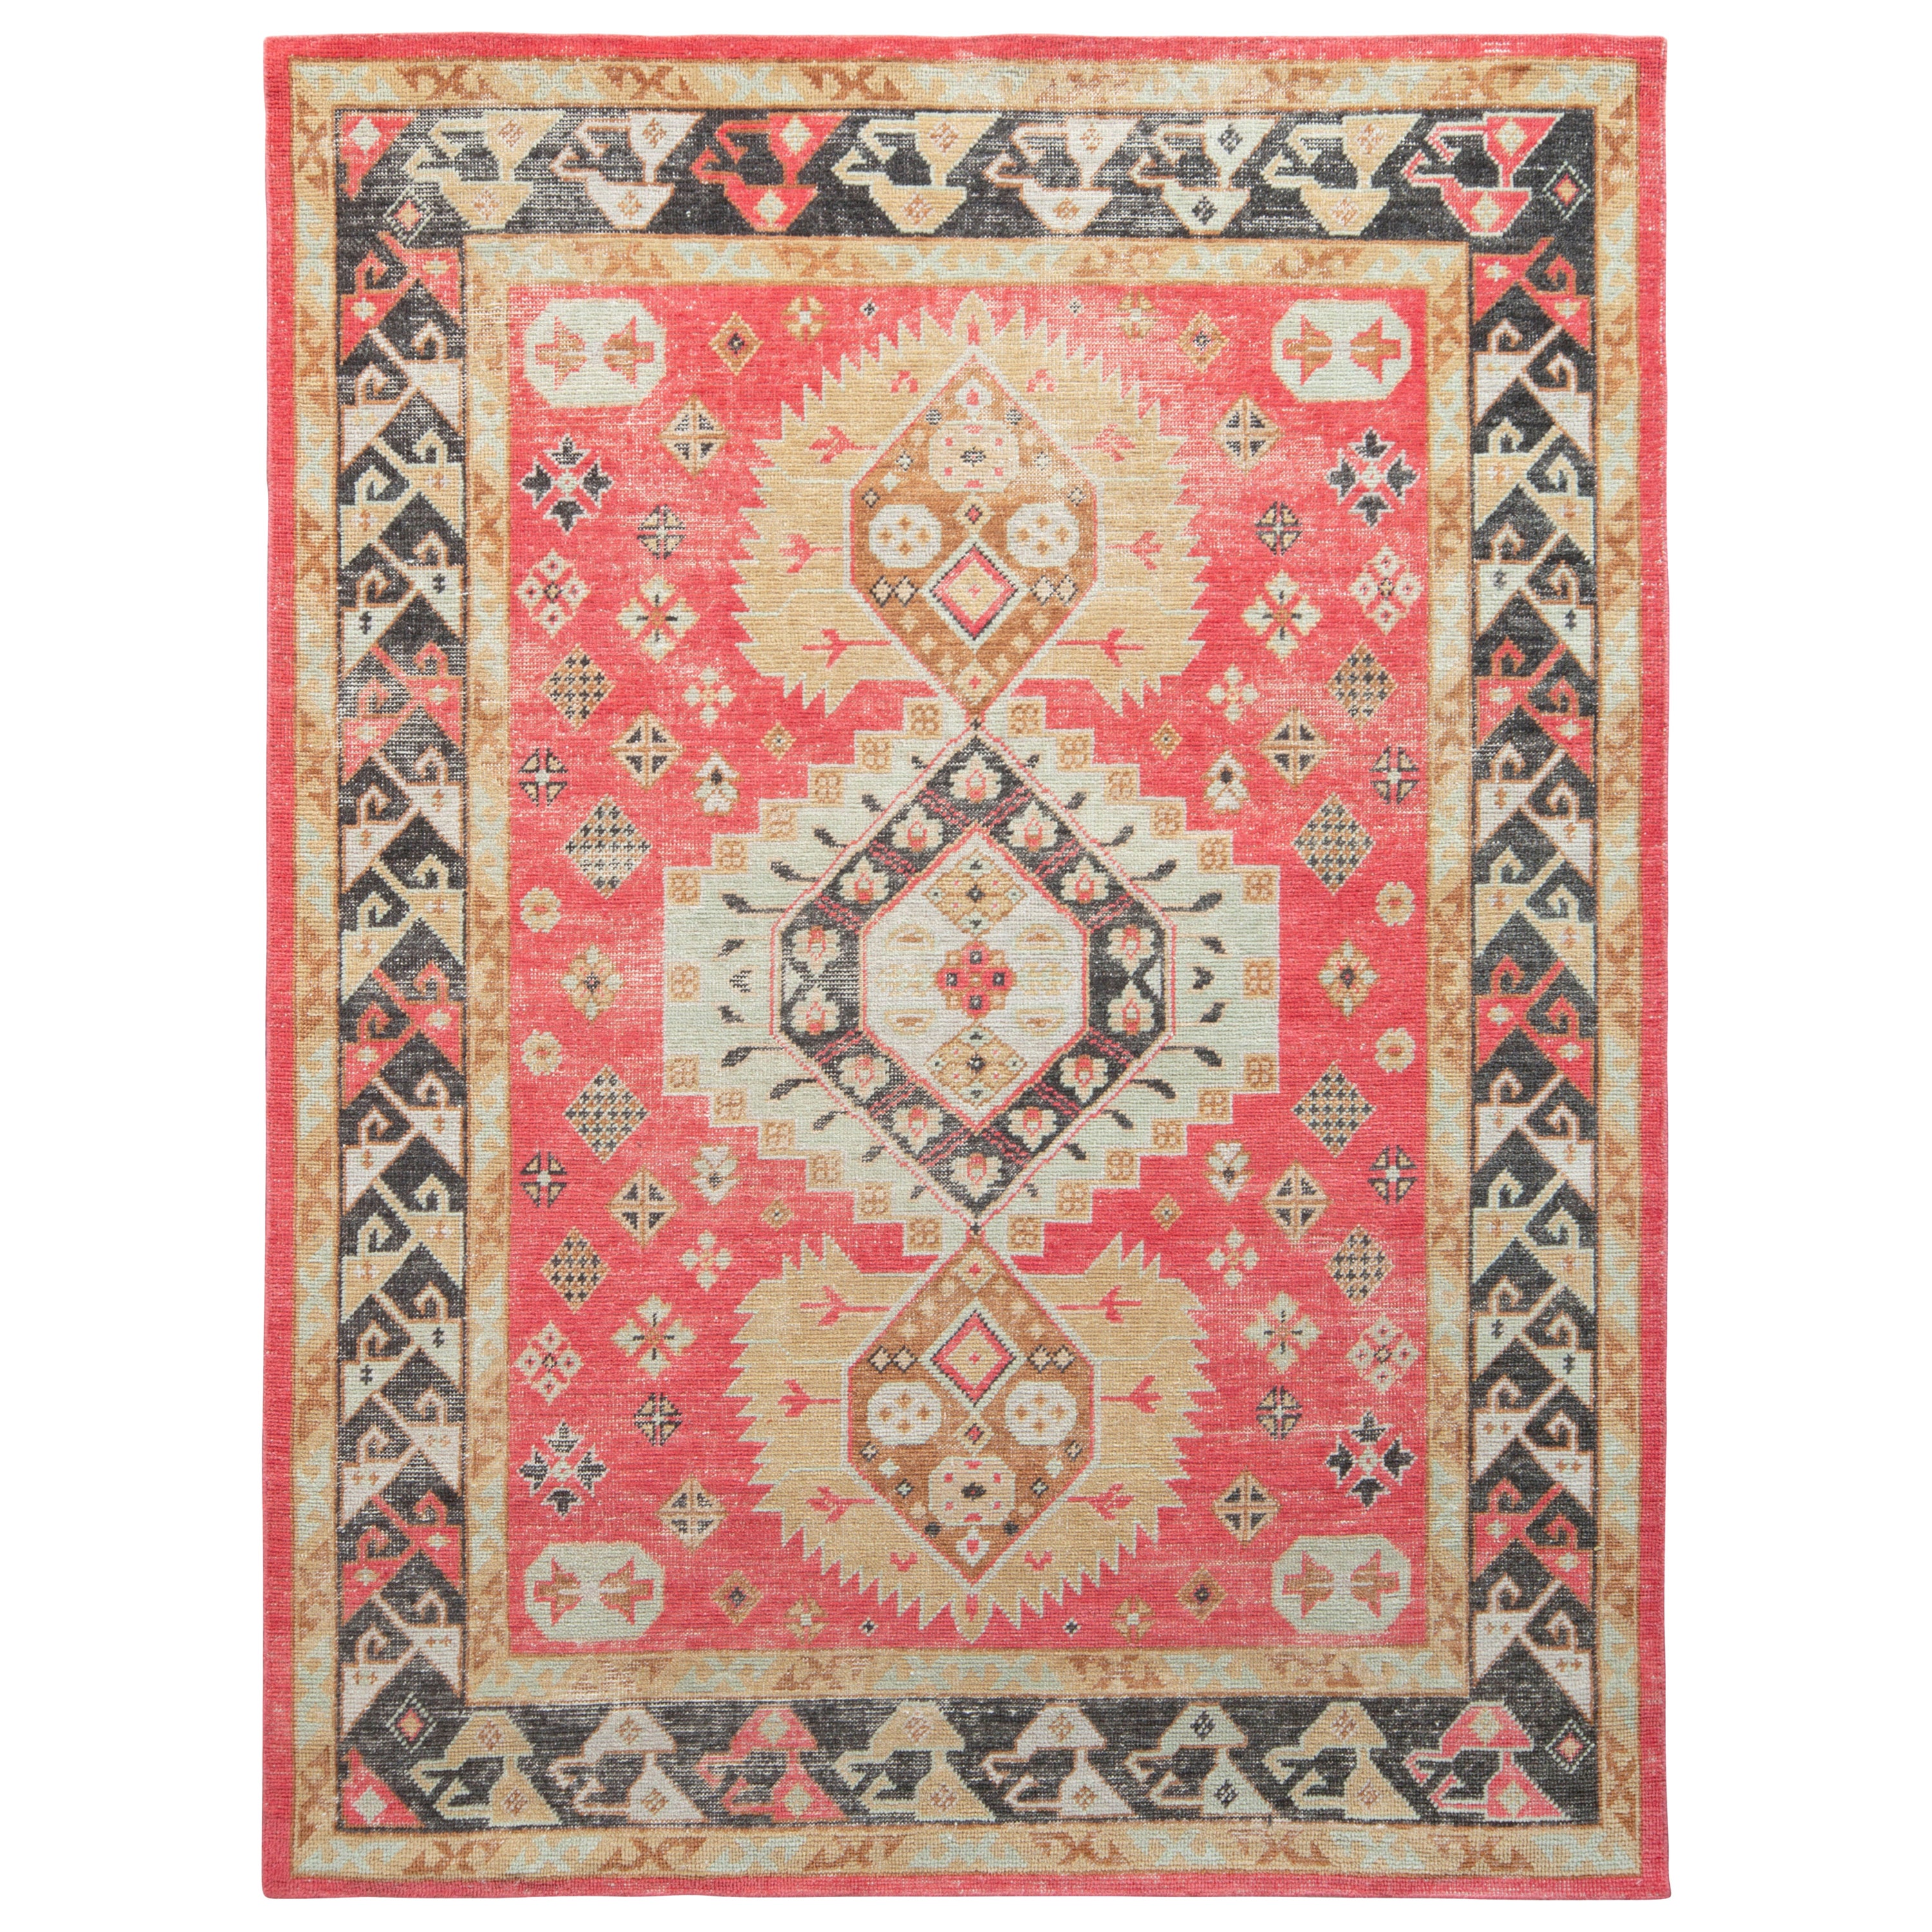 Rug & Kilim's Distressed Classic Style Teppich in Rot, Beige-Braun mit Medaillon-Muster im Angebot